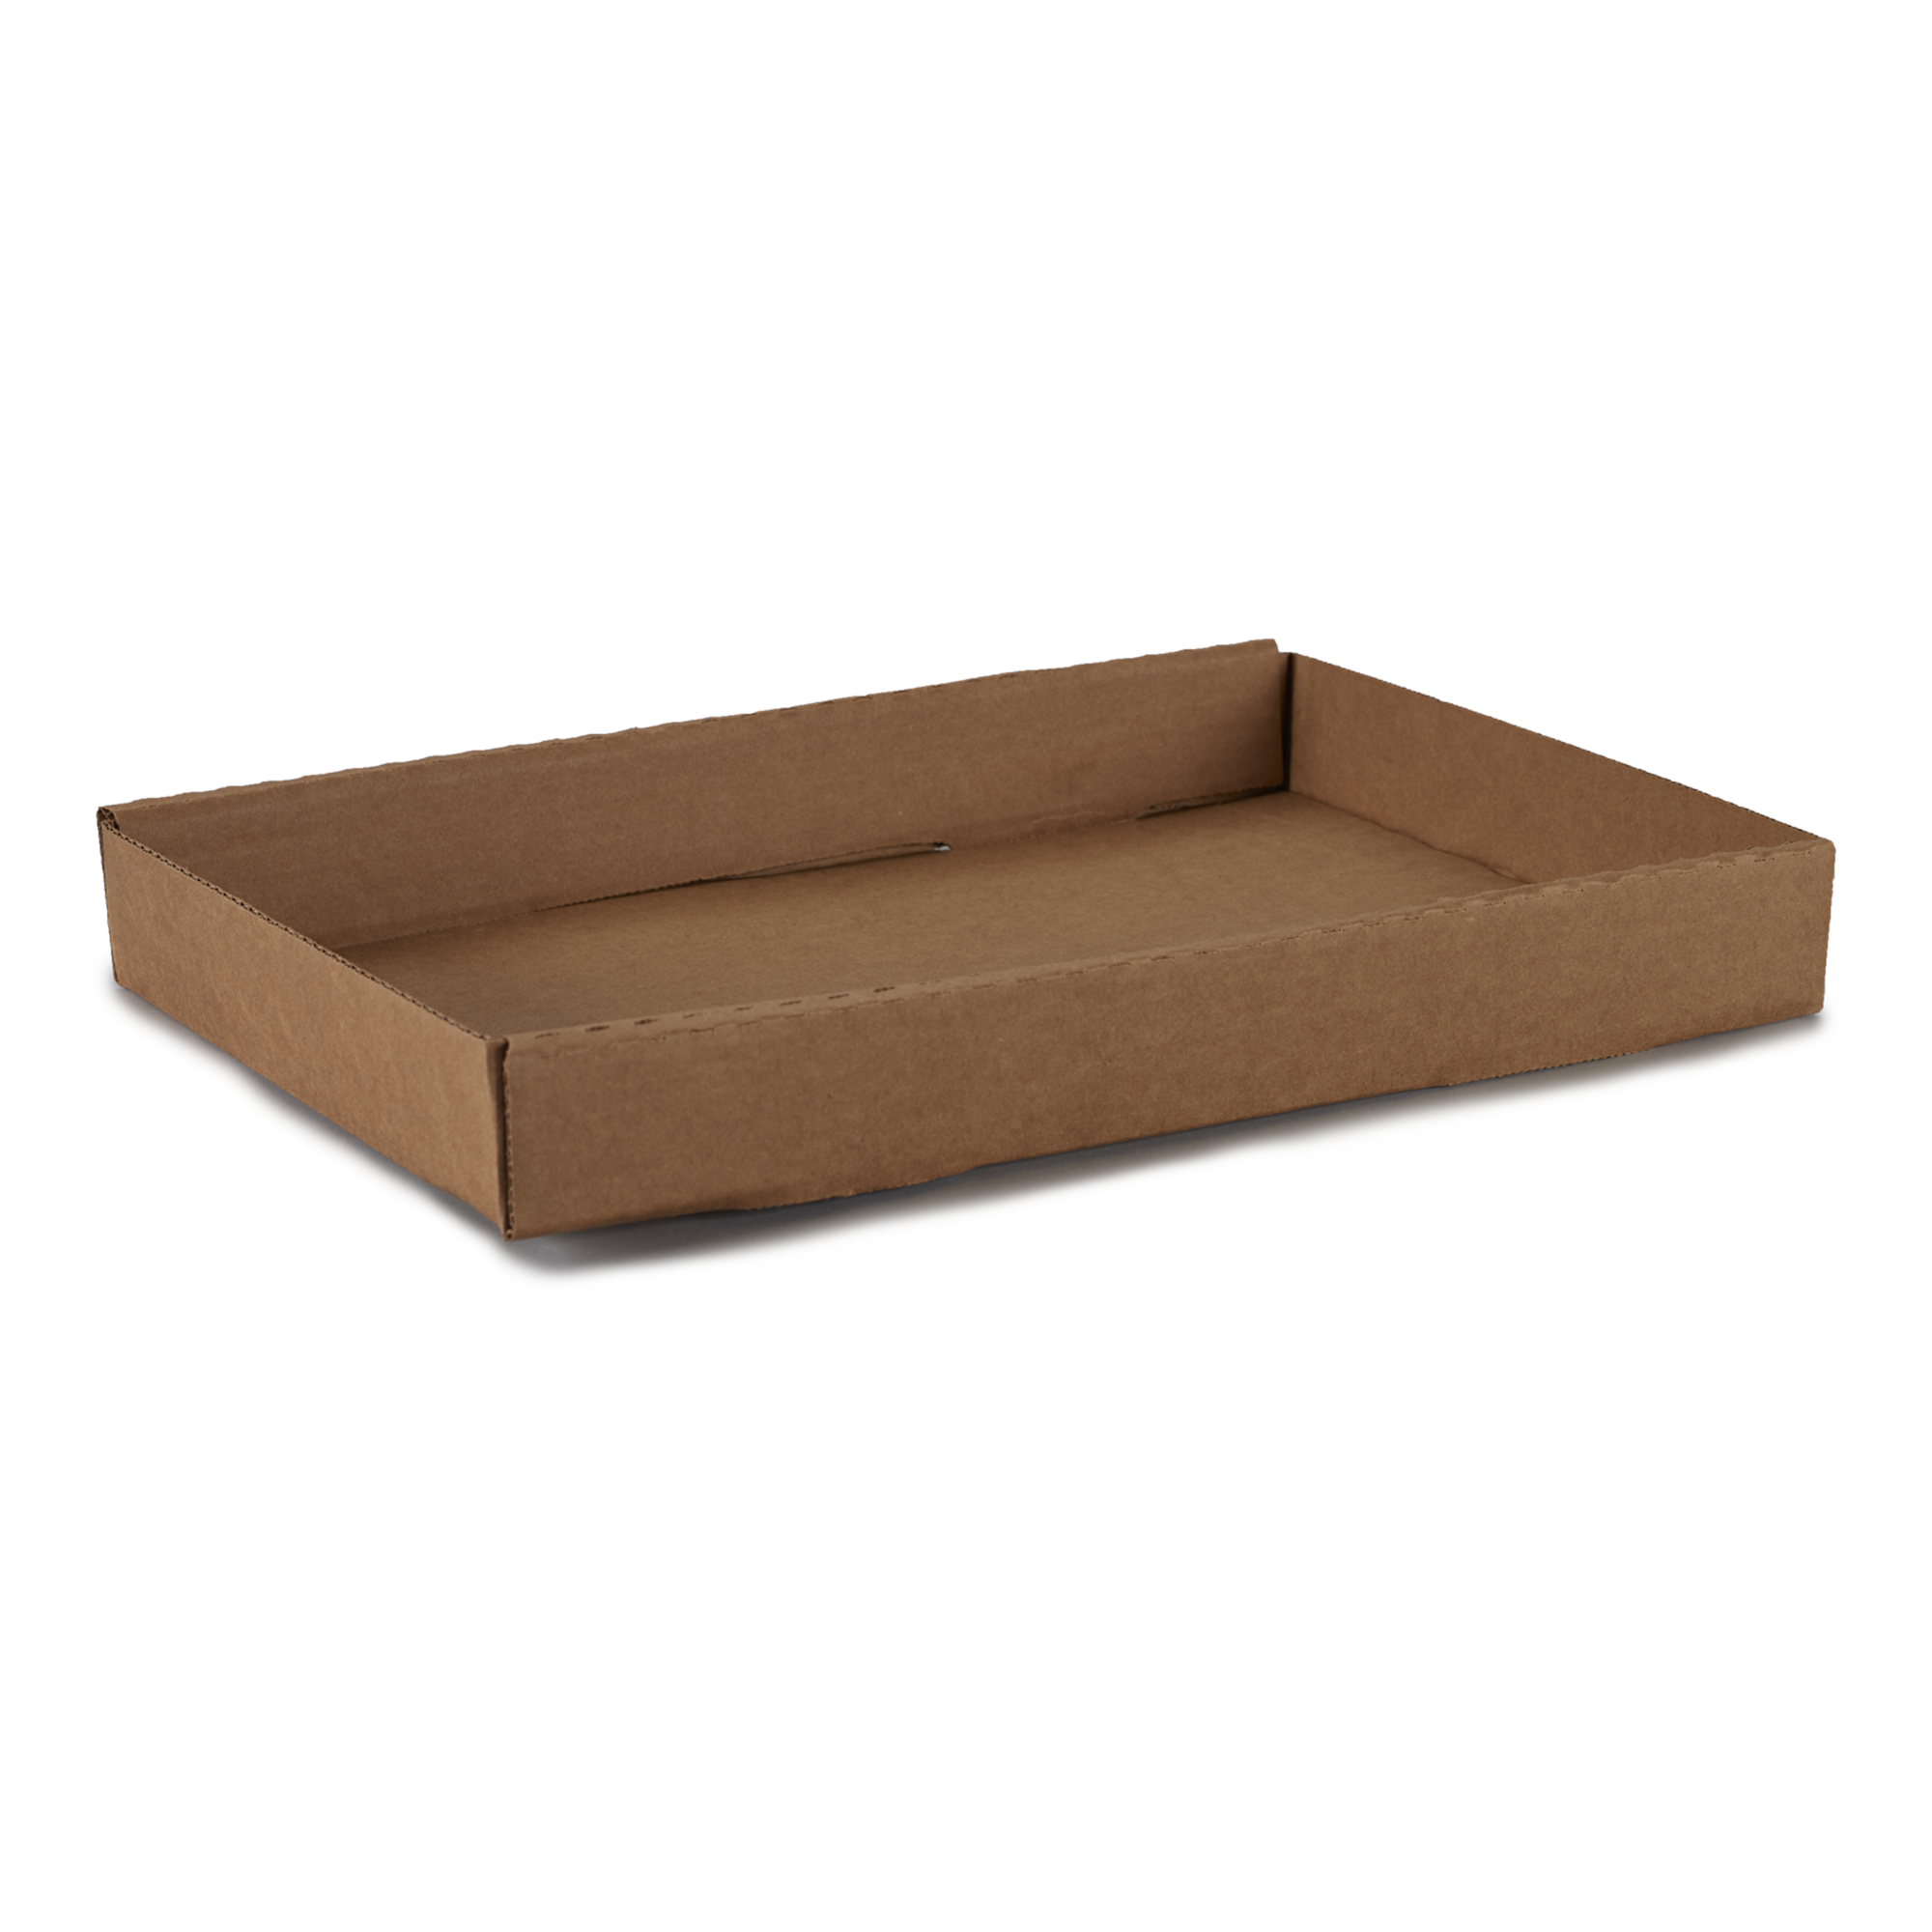 Standard Rollover Case Tray - American Canning